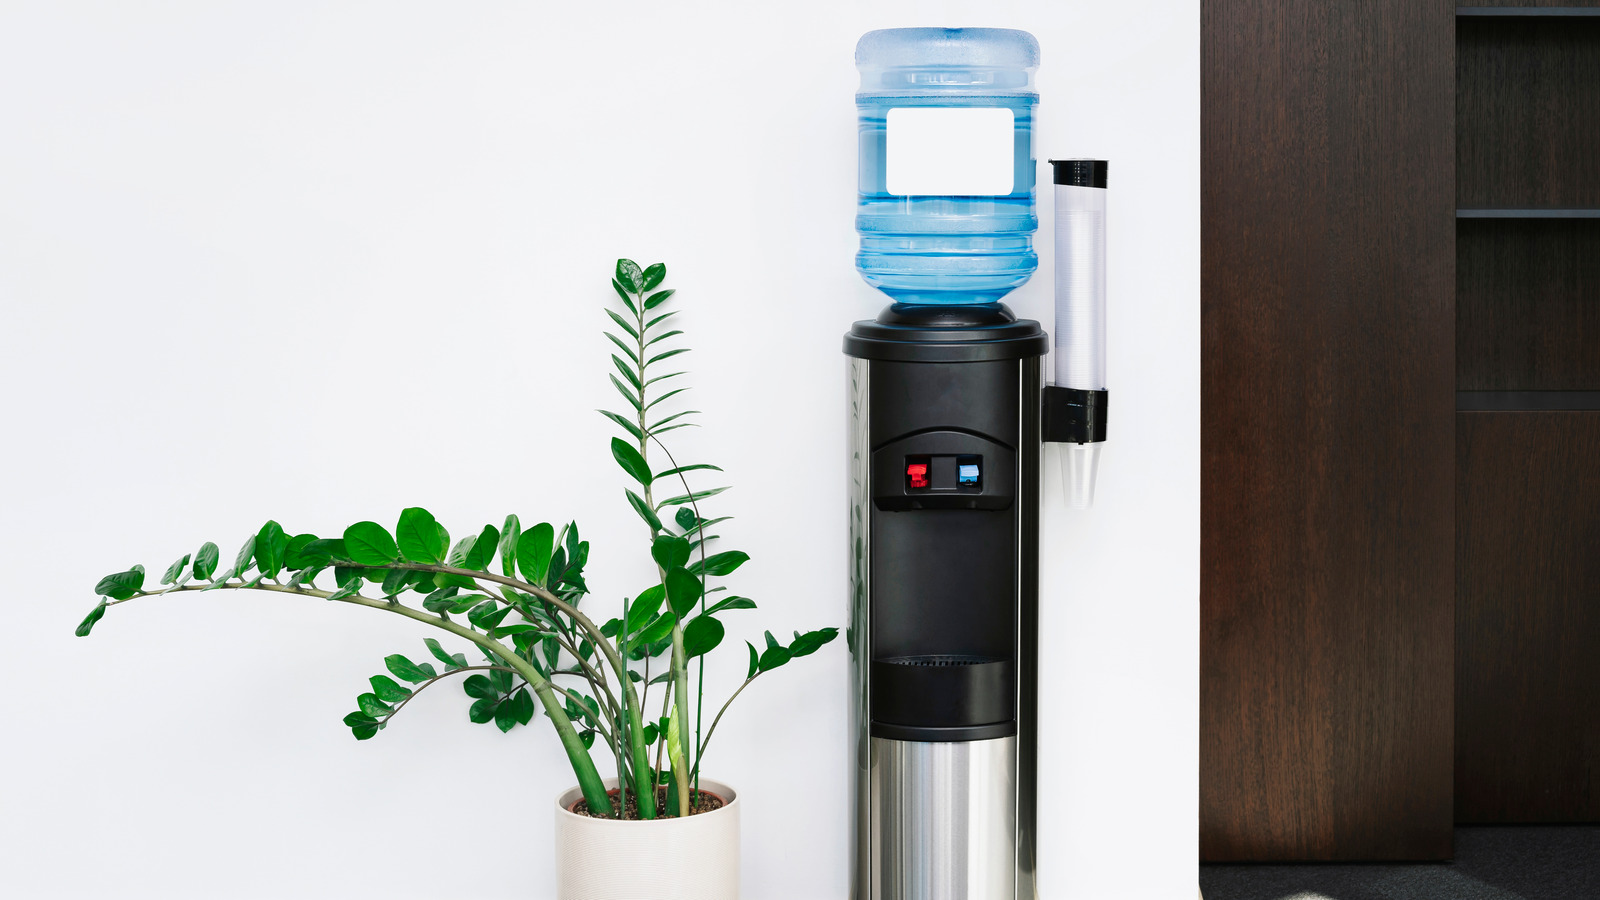 https://www.tastingtable.com/img/gallery/why-you-should-never-put-other-drinks-in-a-water-dispenser/l-intro-1686940836.jpg